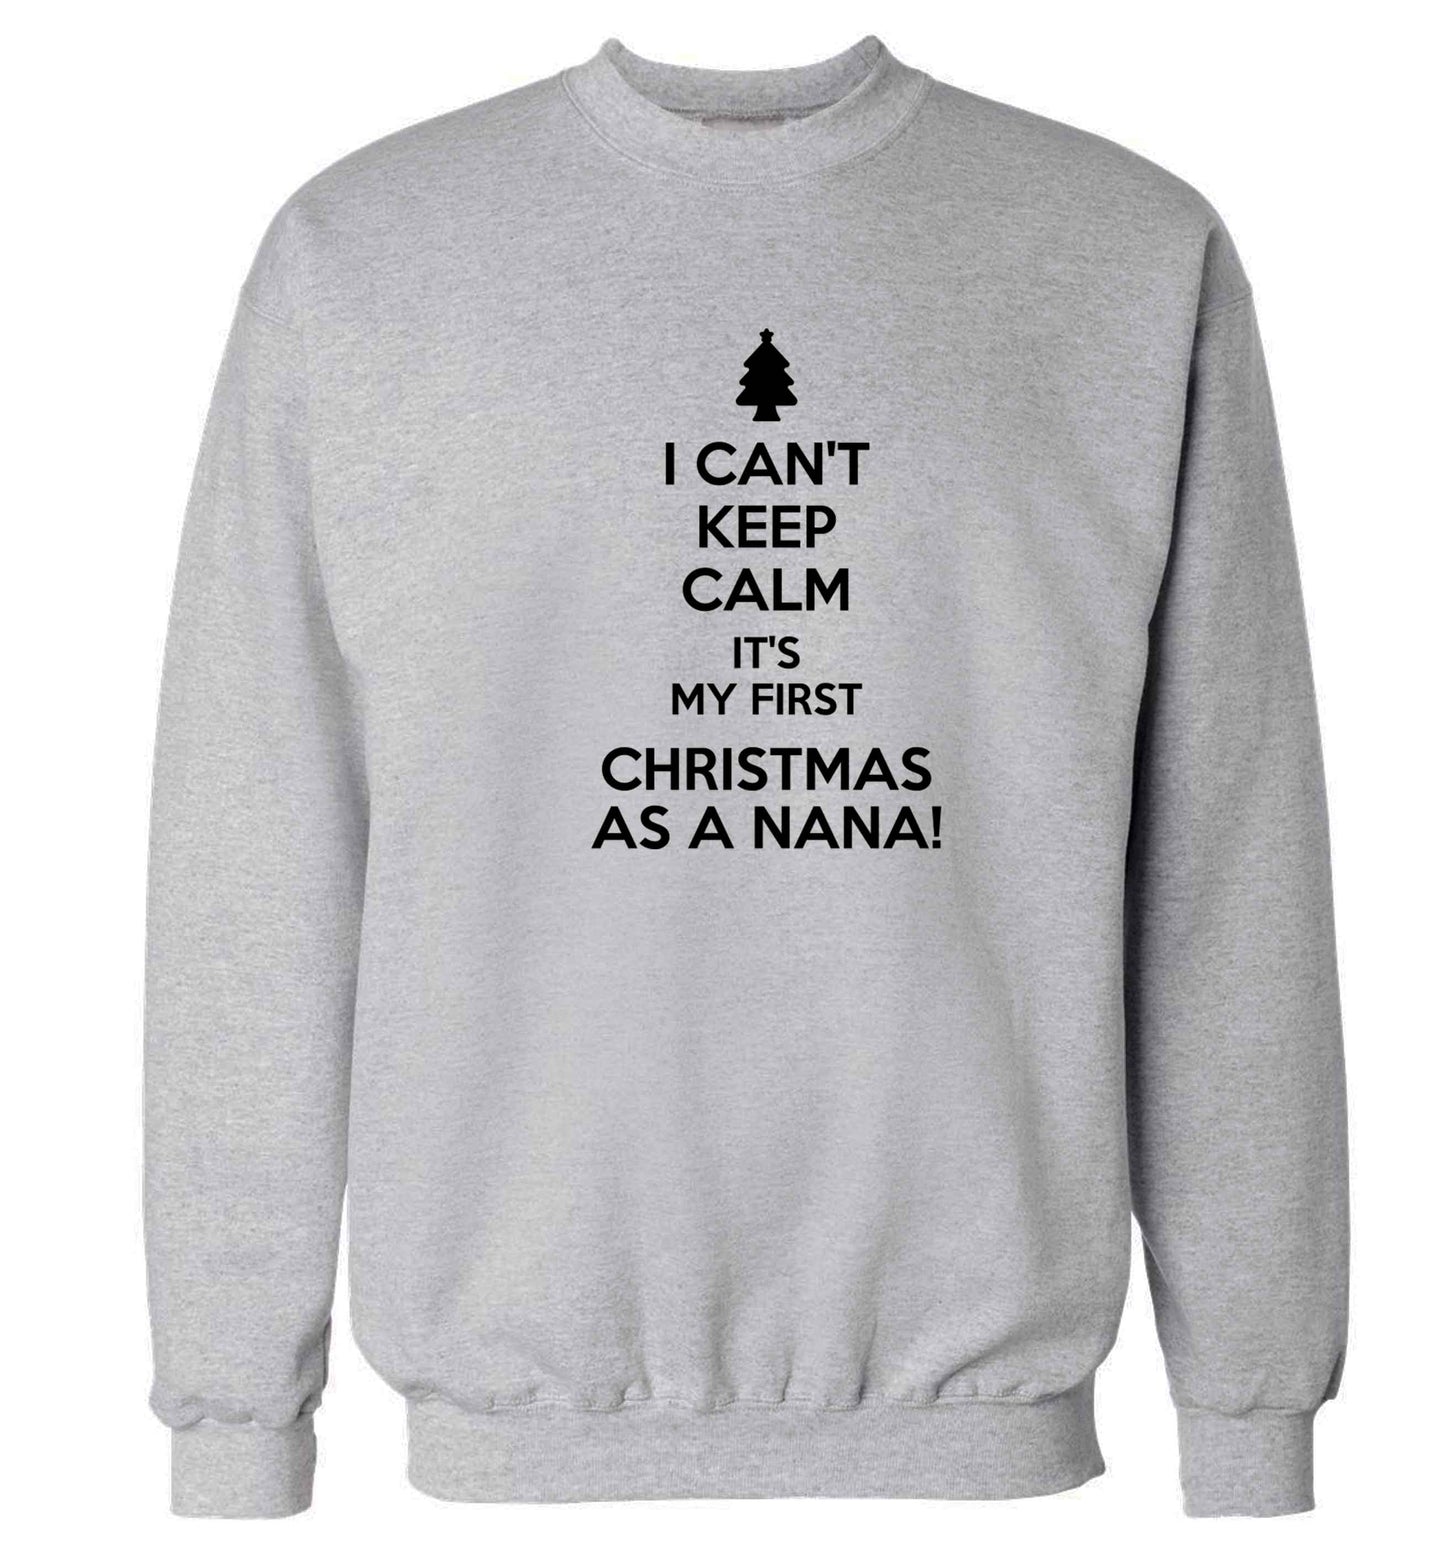 I can't keep calm it's my first Christmas as a nana! Adult's unisex grey Sweater 2XL